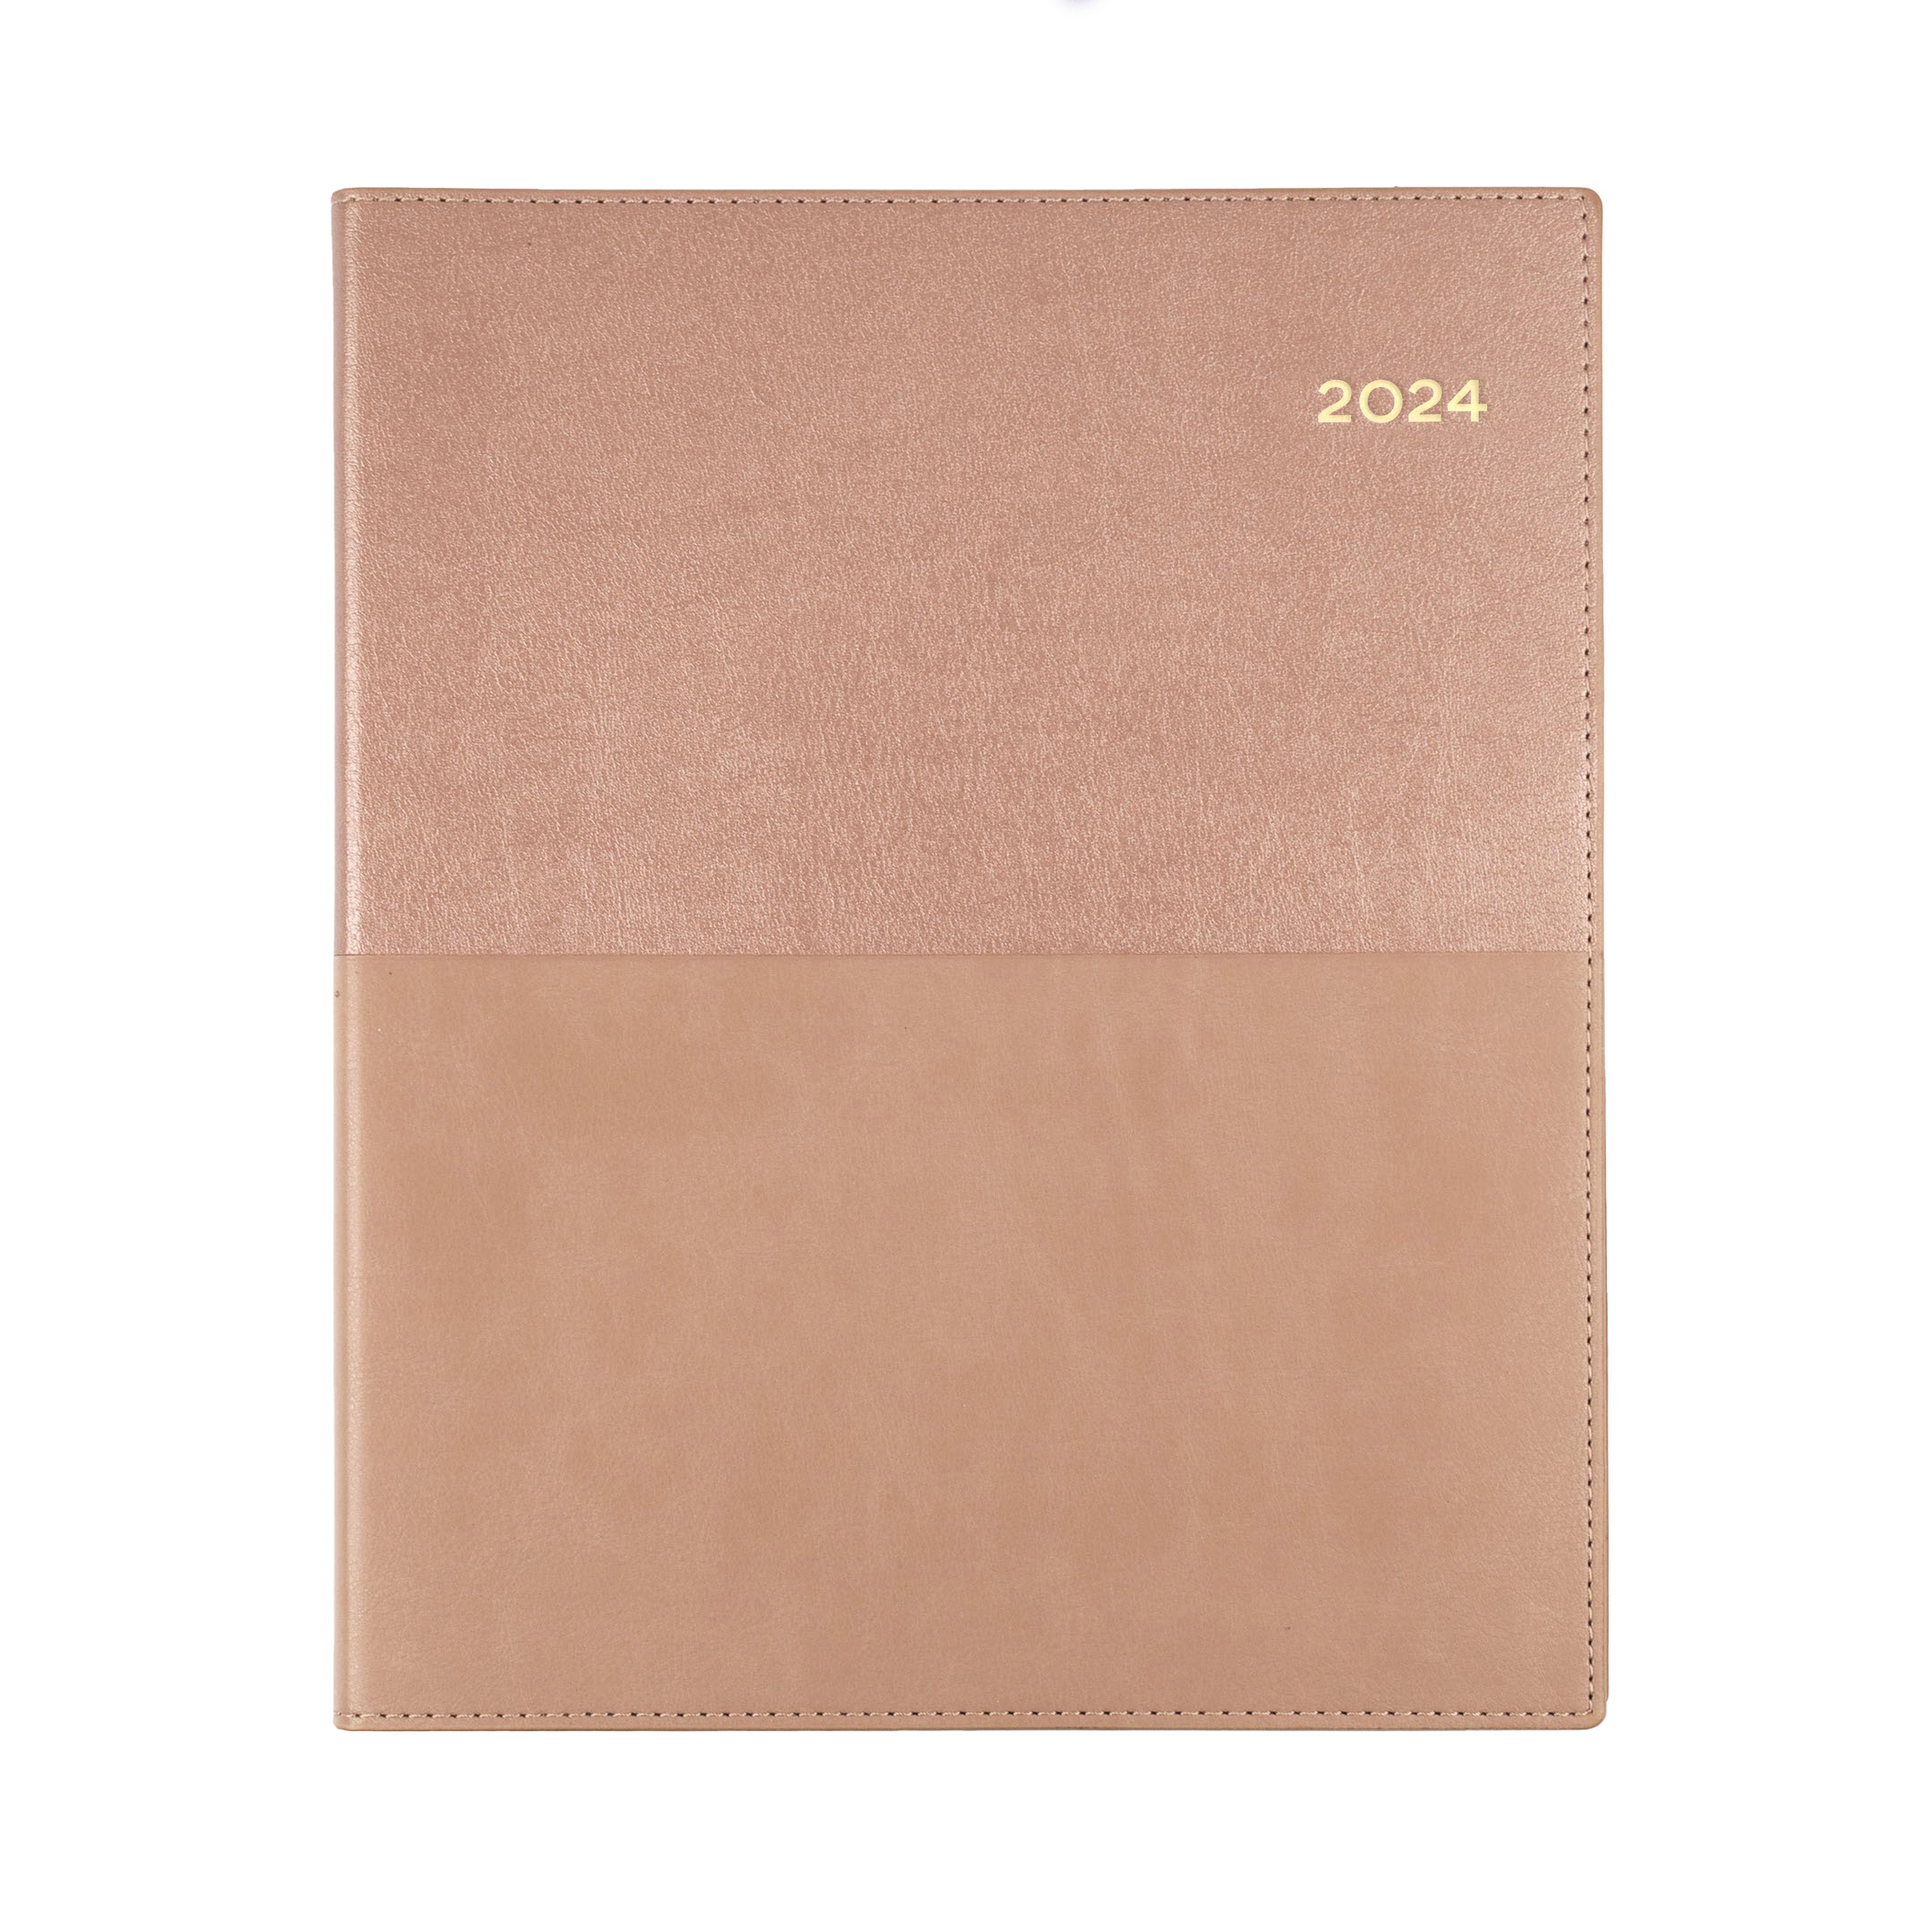 Collins Vanessa 2024 Diary - Vertical Week to View